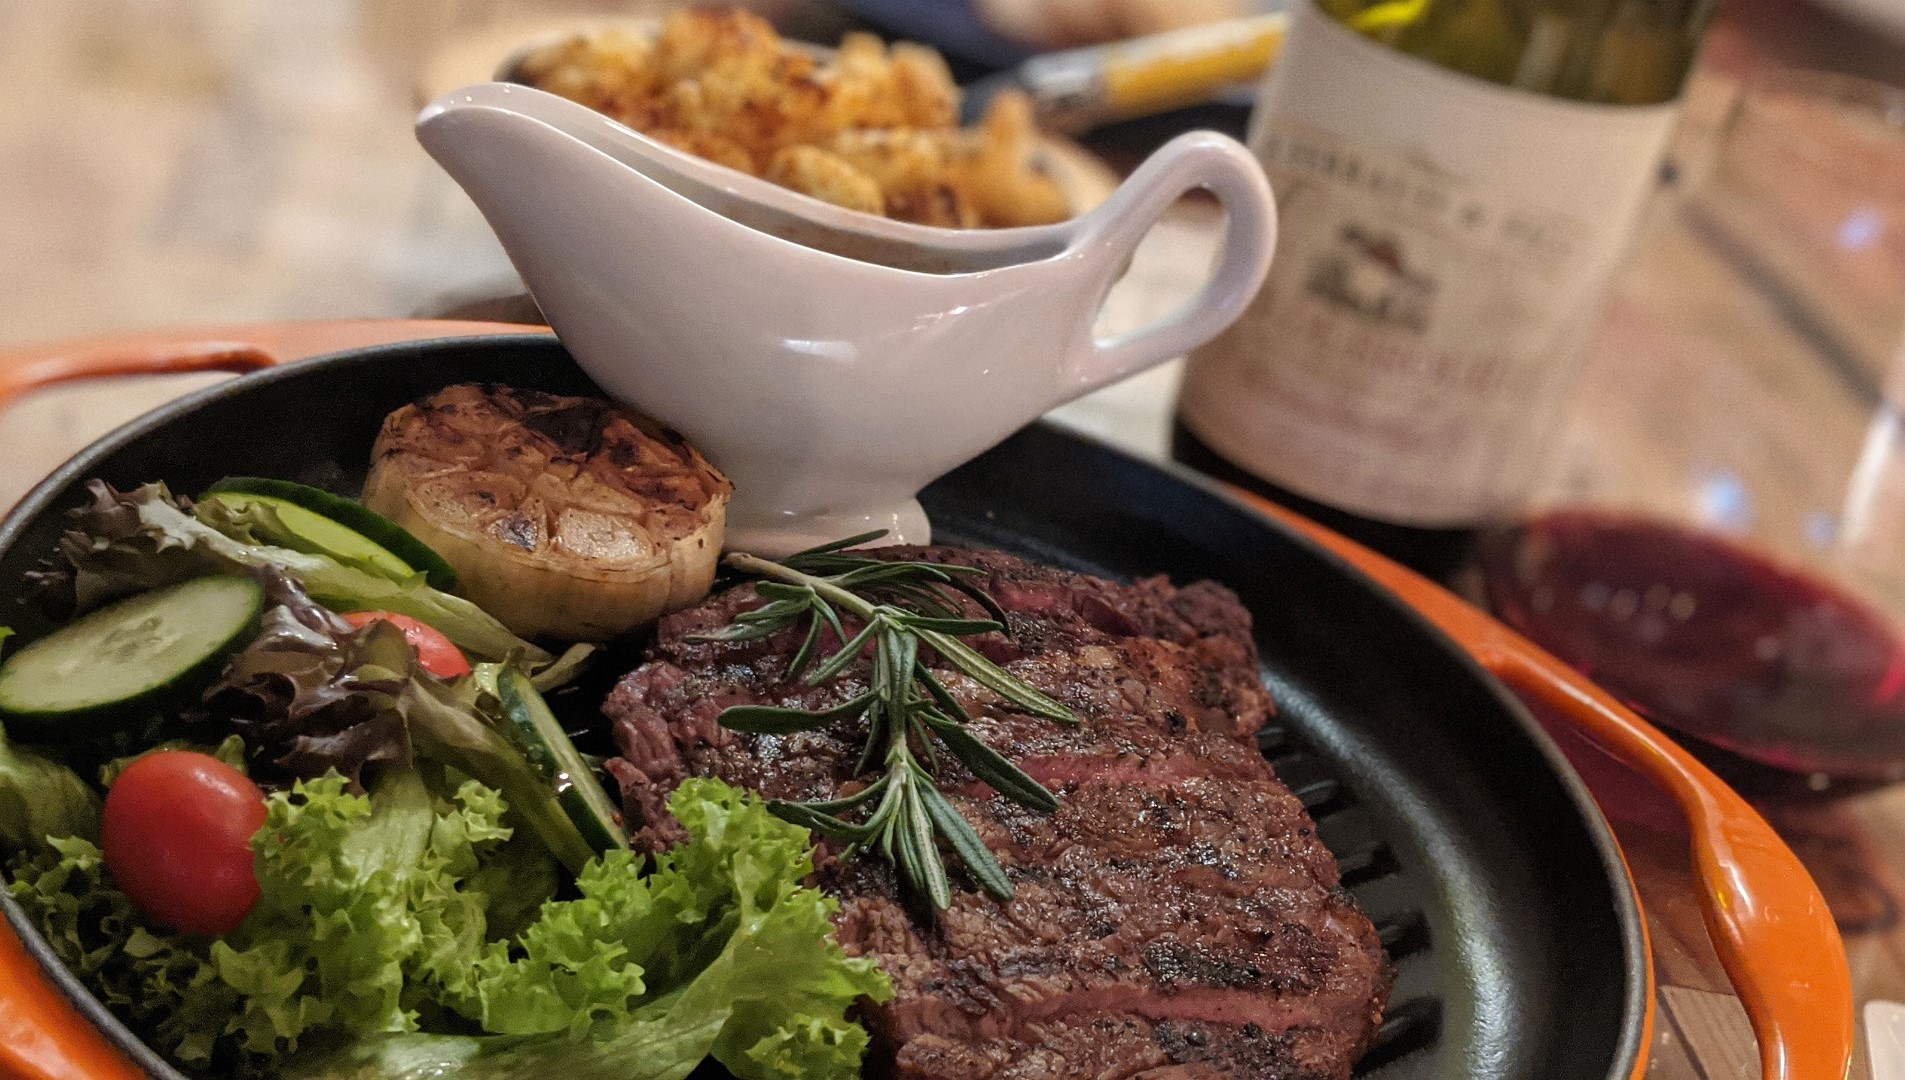 D'Caveau: A Bottle of Wine with a Side of Steak